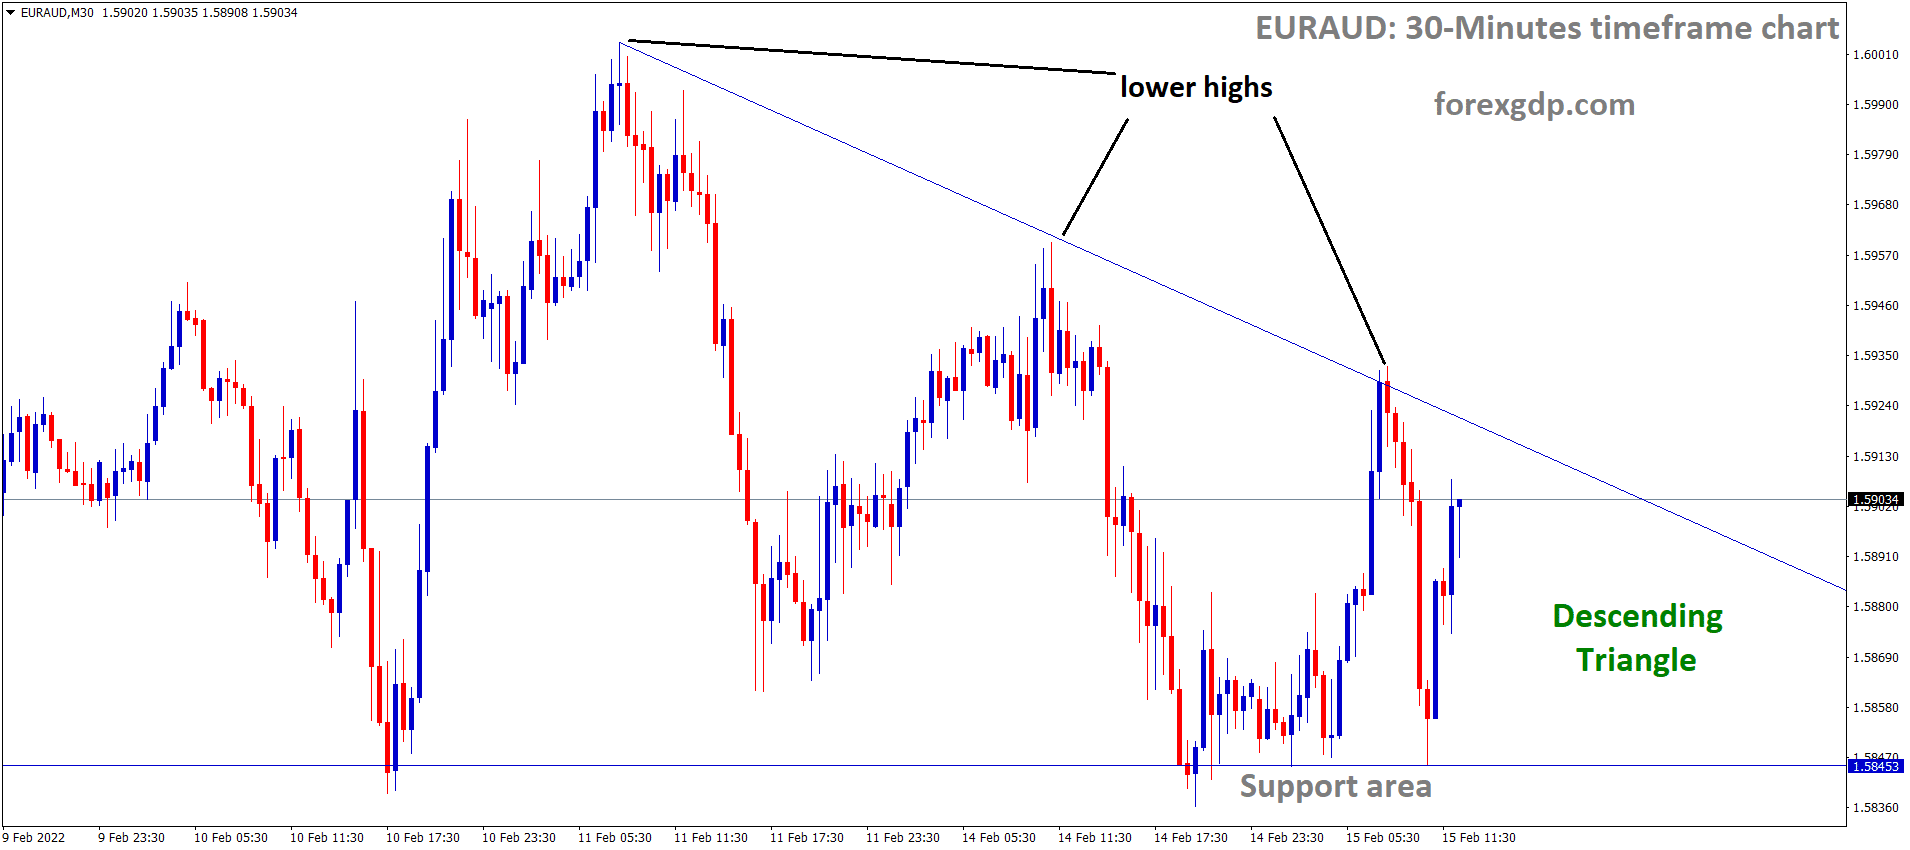 EURAUD is moving in a Descending triangle pattern and the market has rebounded from the Support area of the pattern